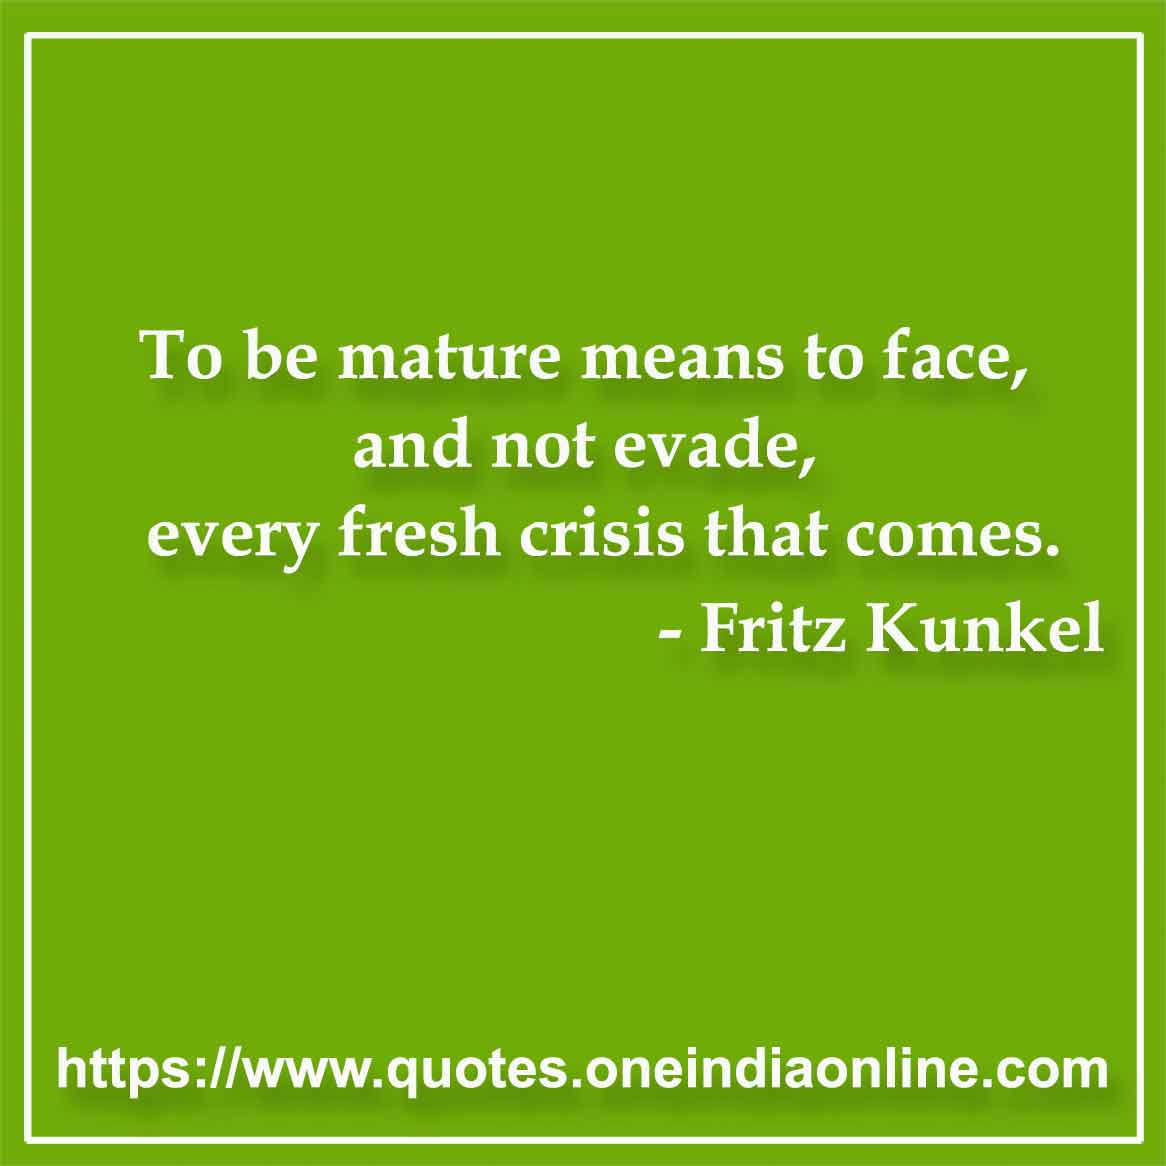 To be mature means to face, and not evade, every fresh crisis that comes.

- Maturity Quotes by Fritz Kunkel